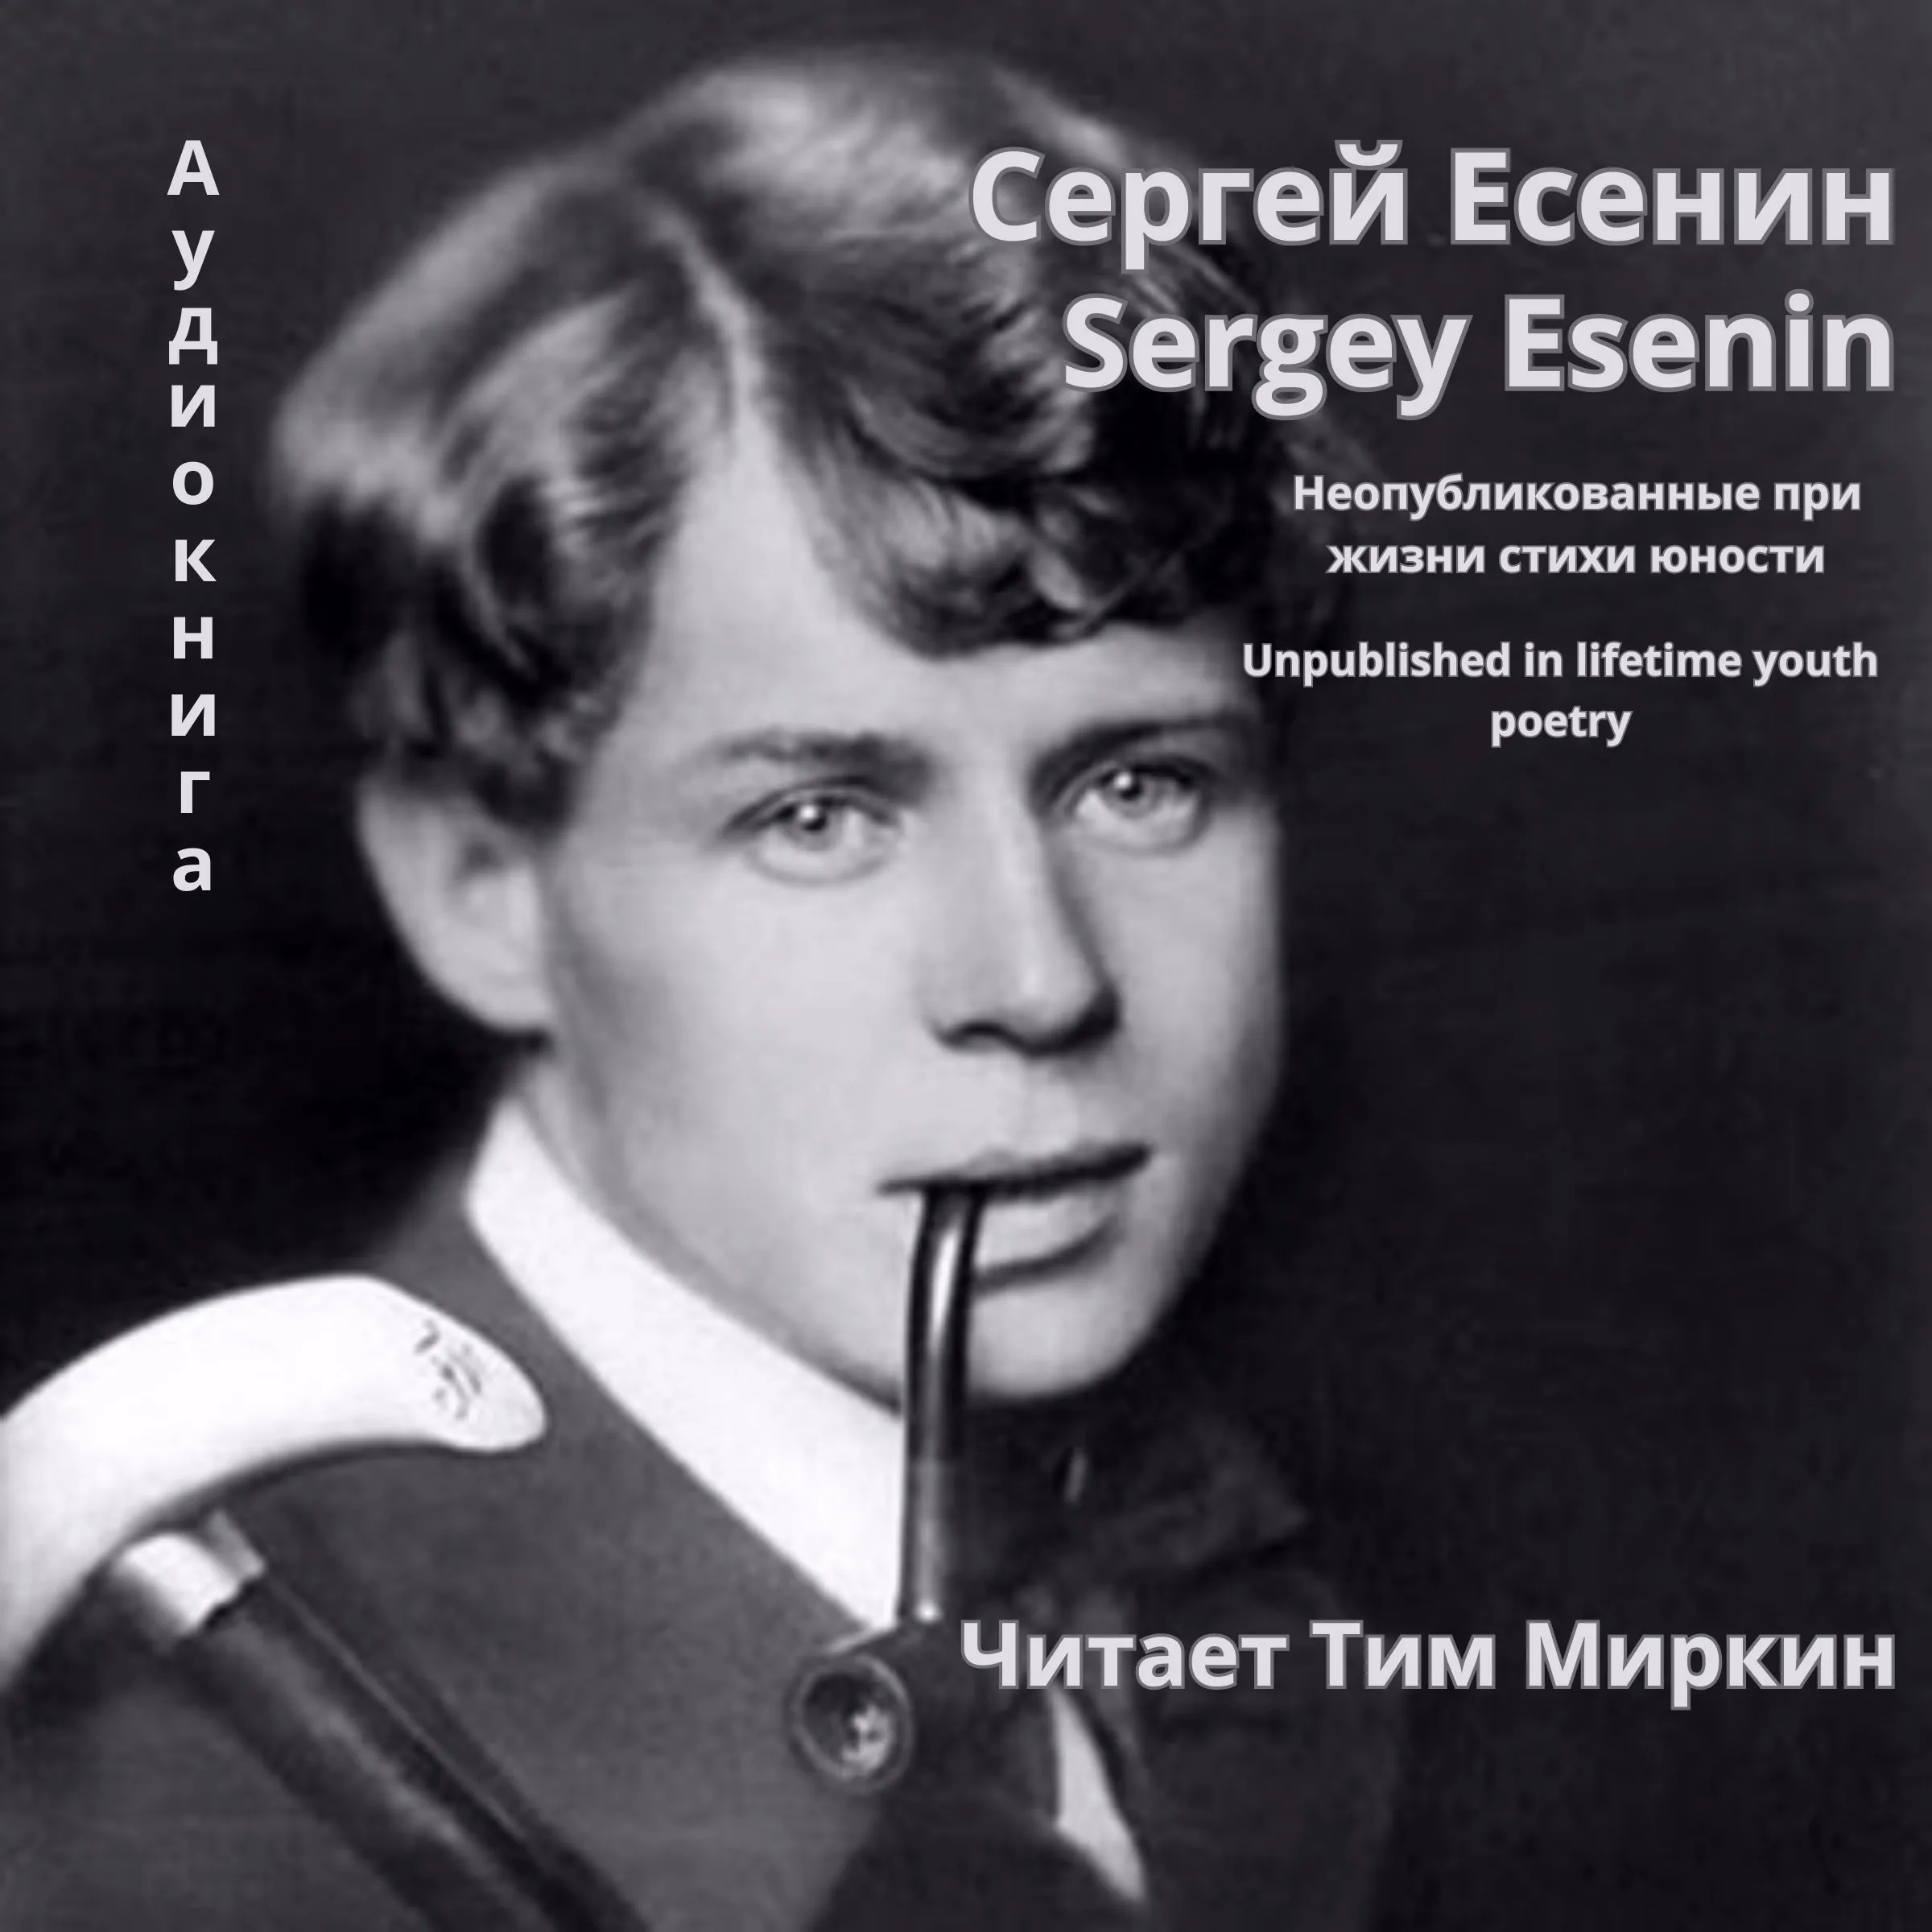 Unpublished in lifetime youth poetry Audiobook by Sergey Esenin